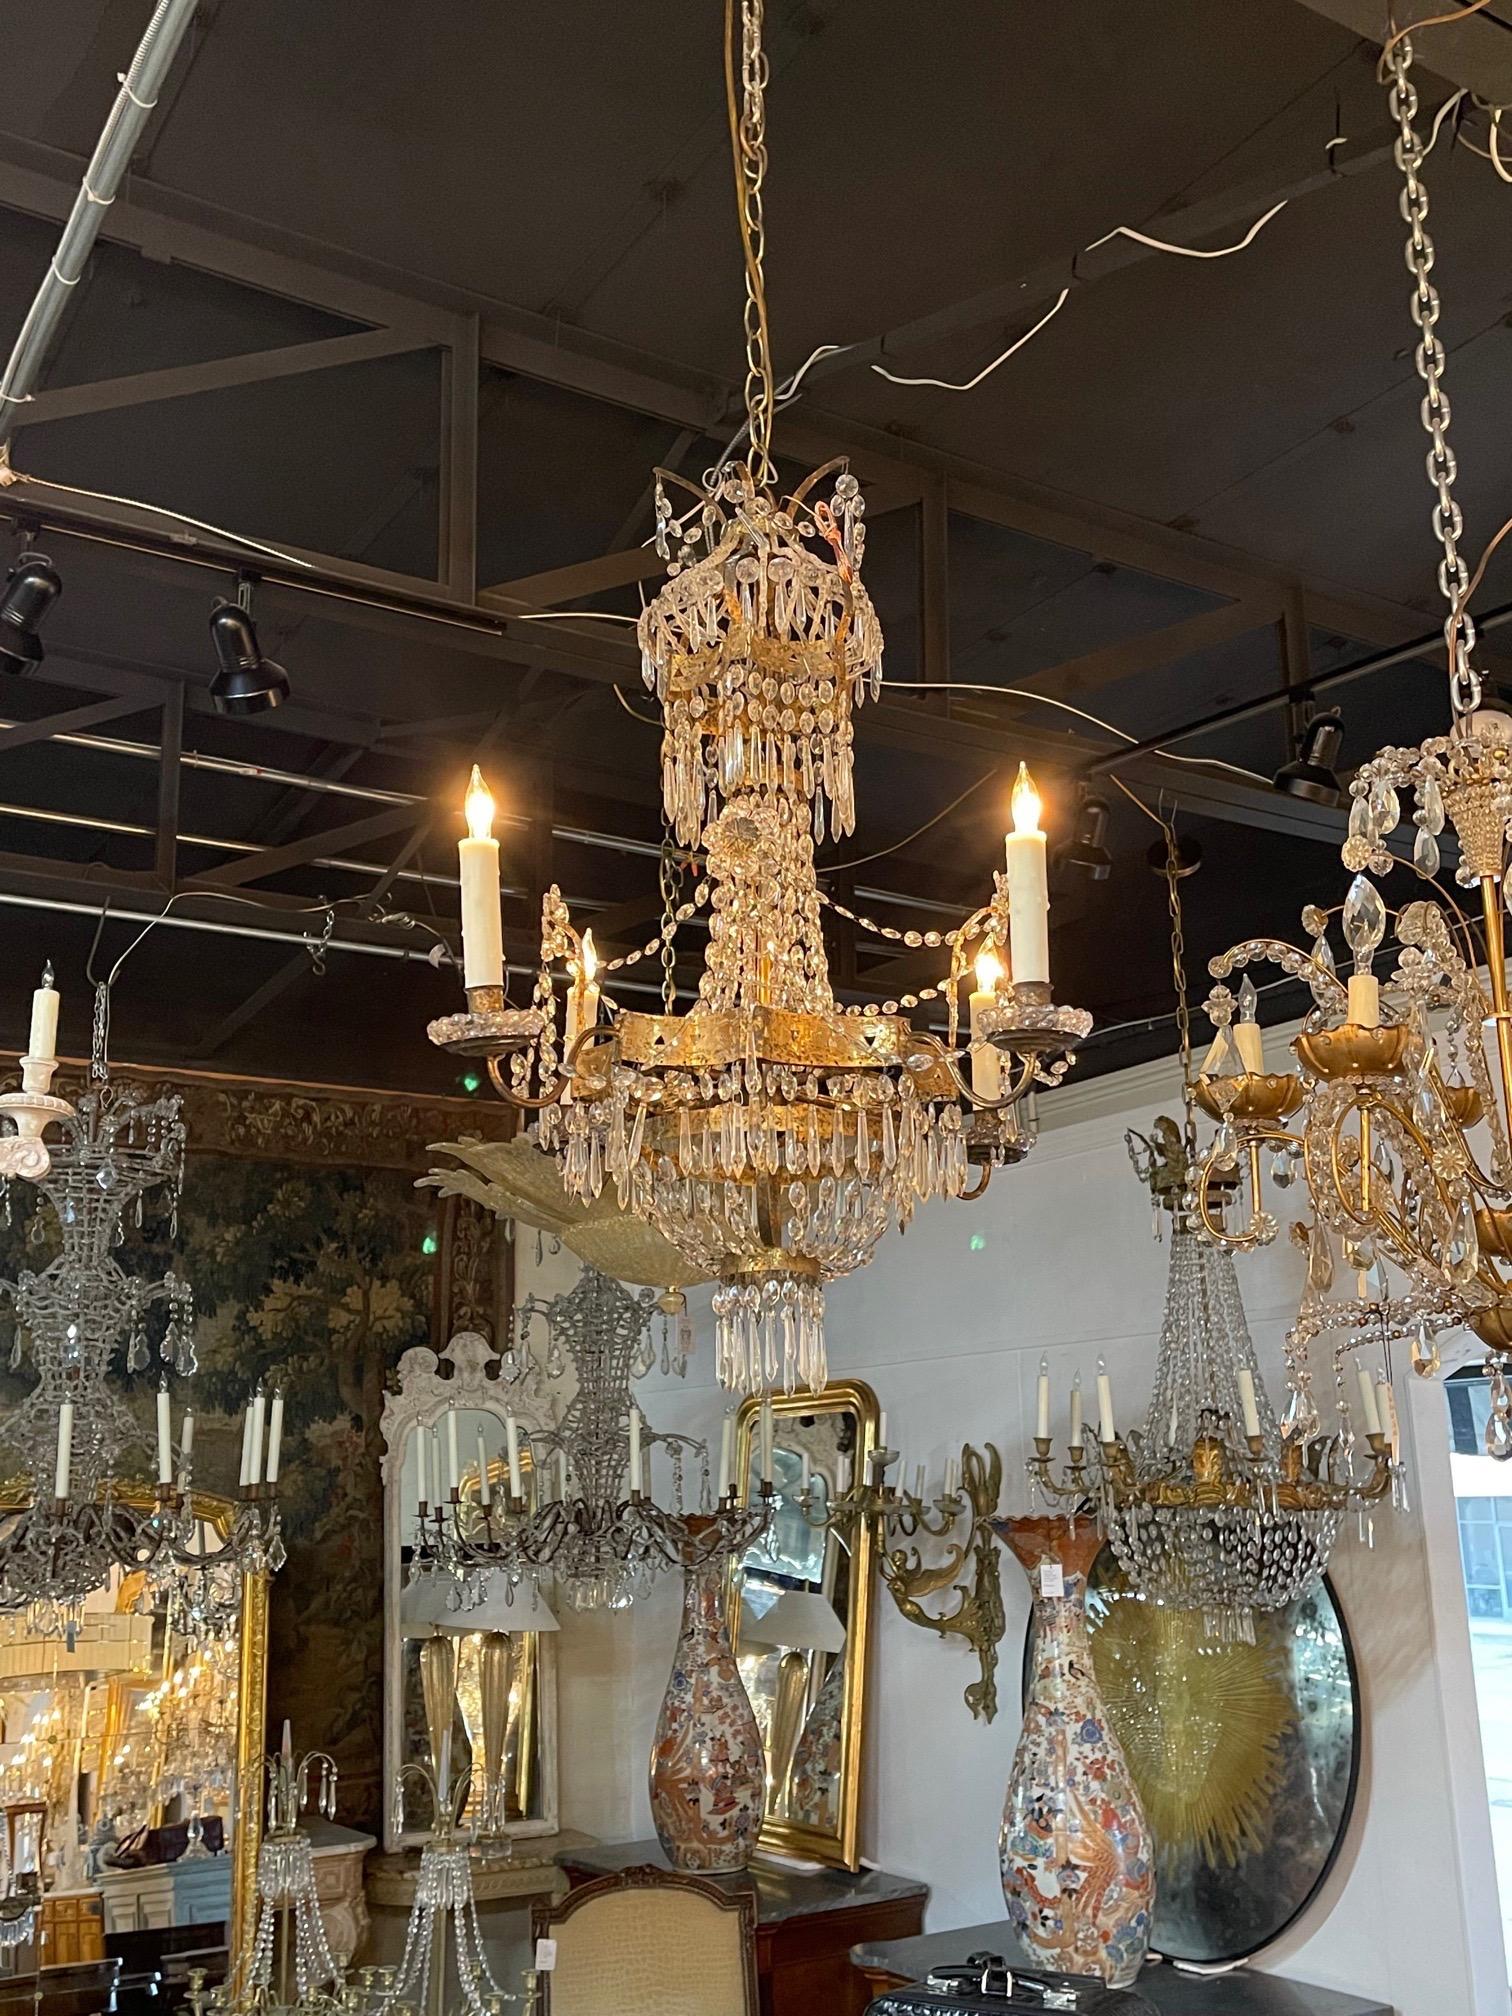 Beautiful 19th century Italian empire style crystal and tole chandelier with 4 lights. Covered in gorgeous crystals. Super elegant!